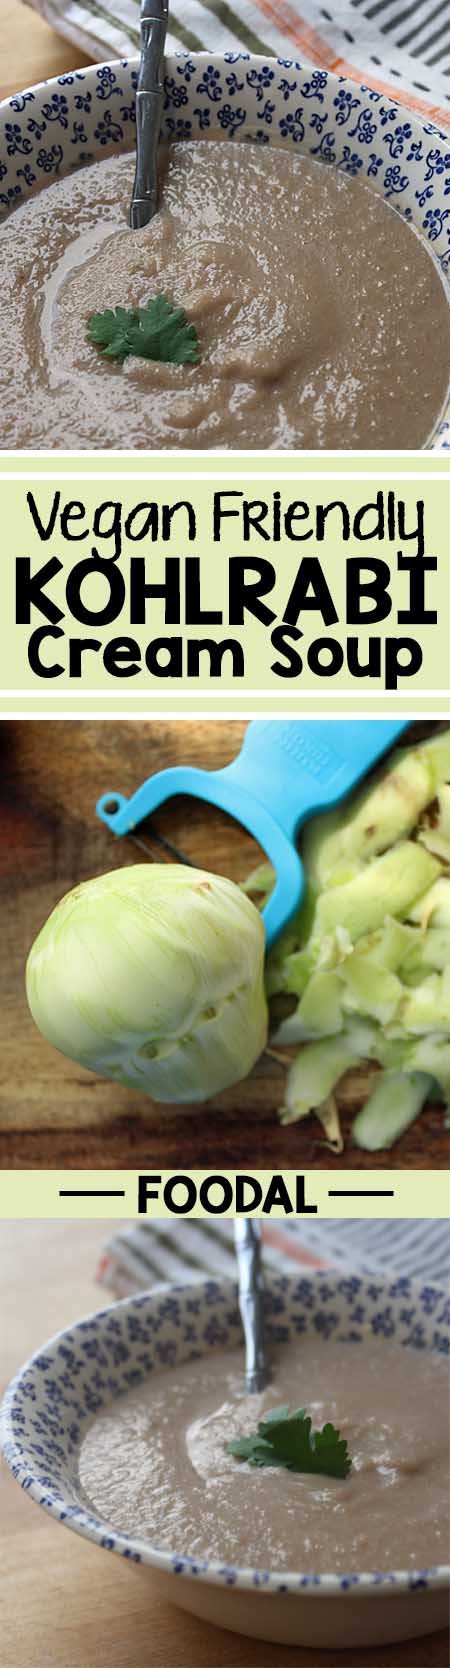 This vegan cream of kohlrabi soup has it all – it’s smooth, creamy, and full of sweet caramelized onions and garlic. In just over an hour, you can make this delicious, flavor-packed soup at home. Serve it with a side of bread and salad, and you've got a hearty vegan meal that will please a crowd. Read more on Foodal. https://foodal.com/recipes/soups/vegan-kohlrabi-soup/